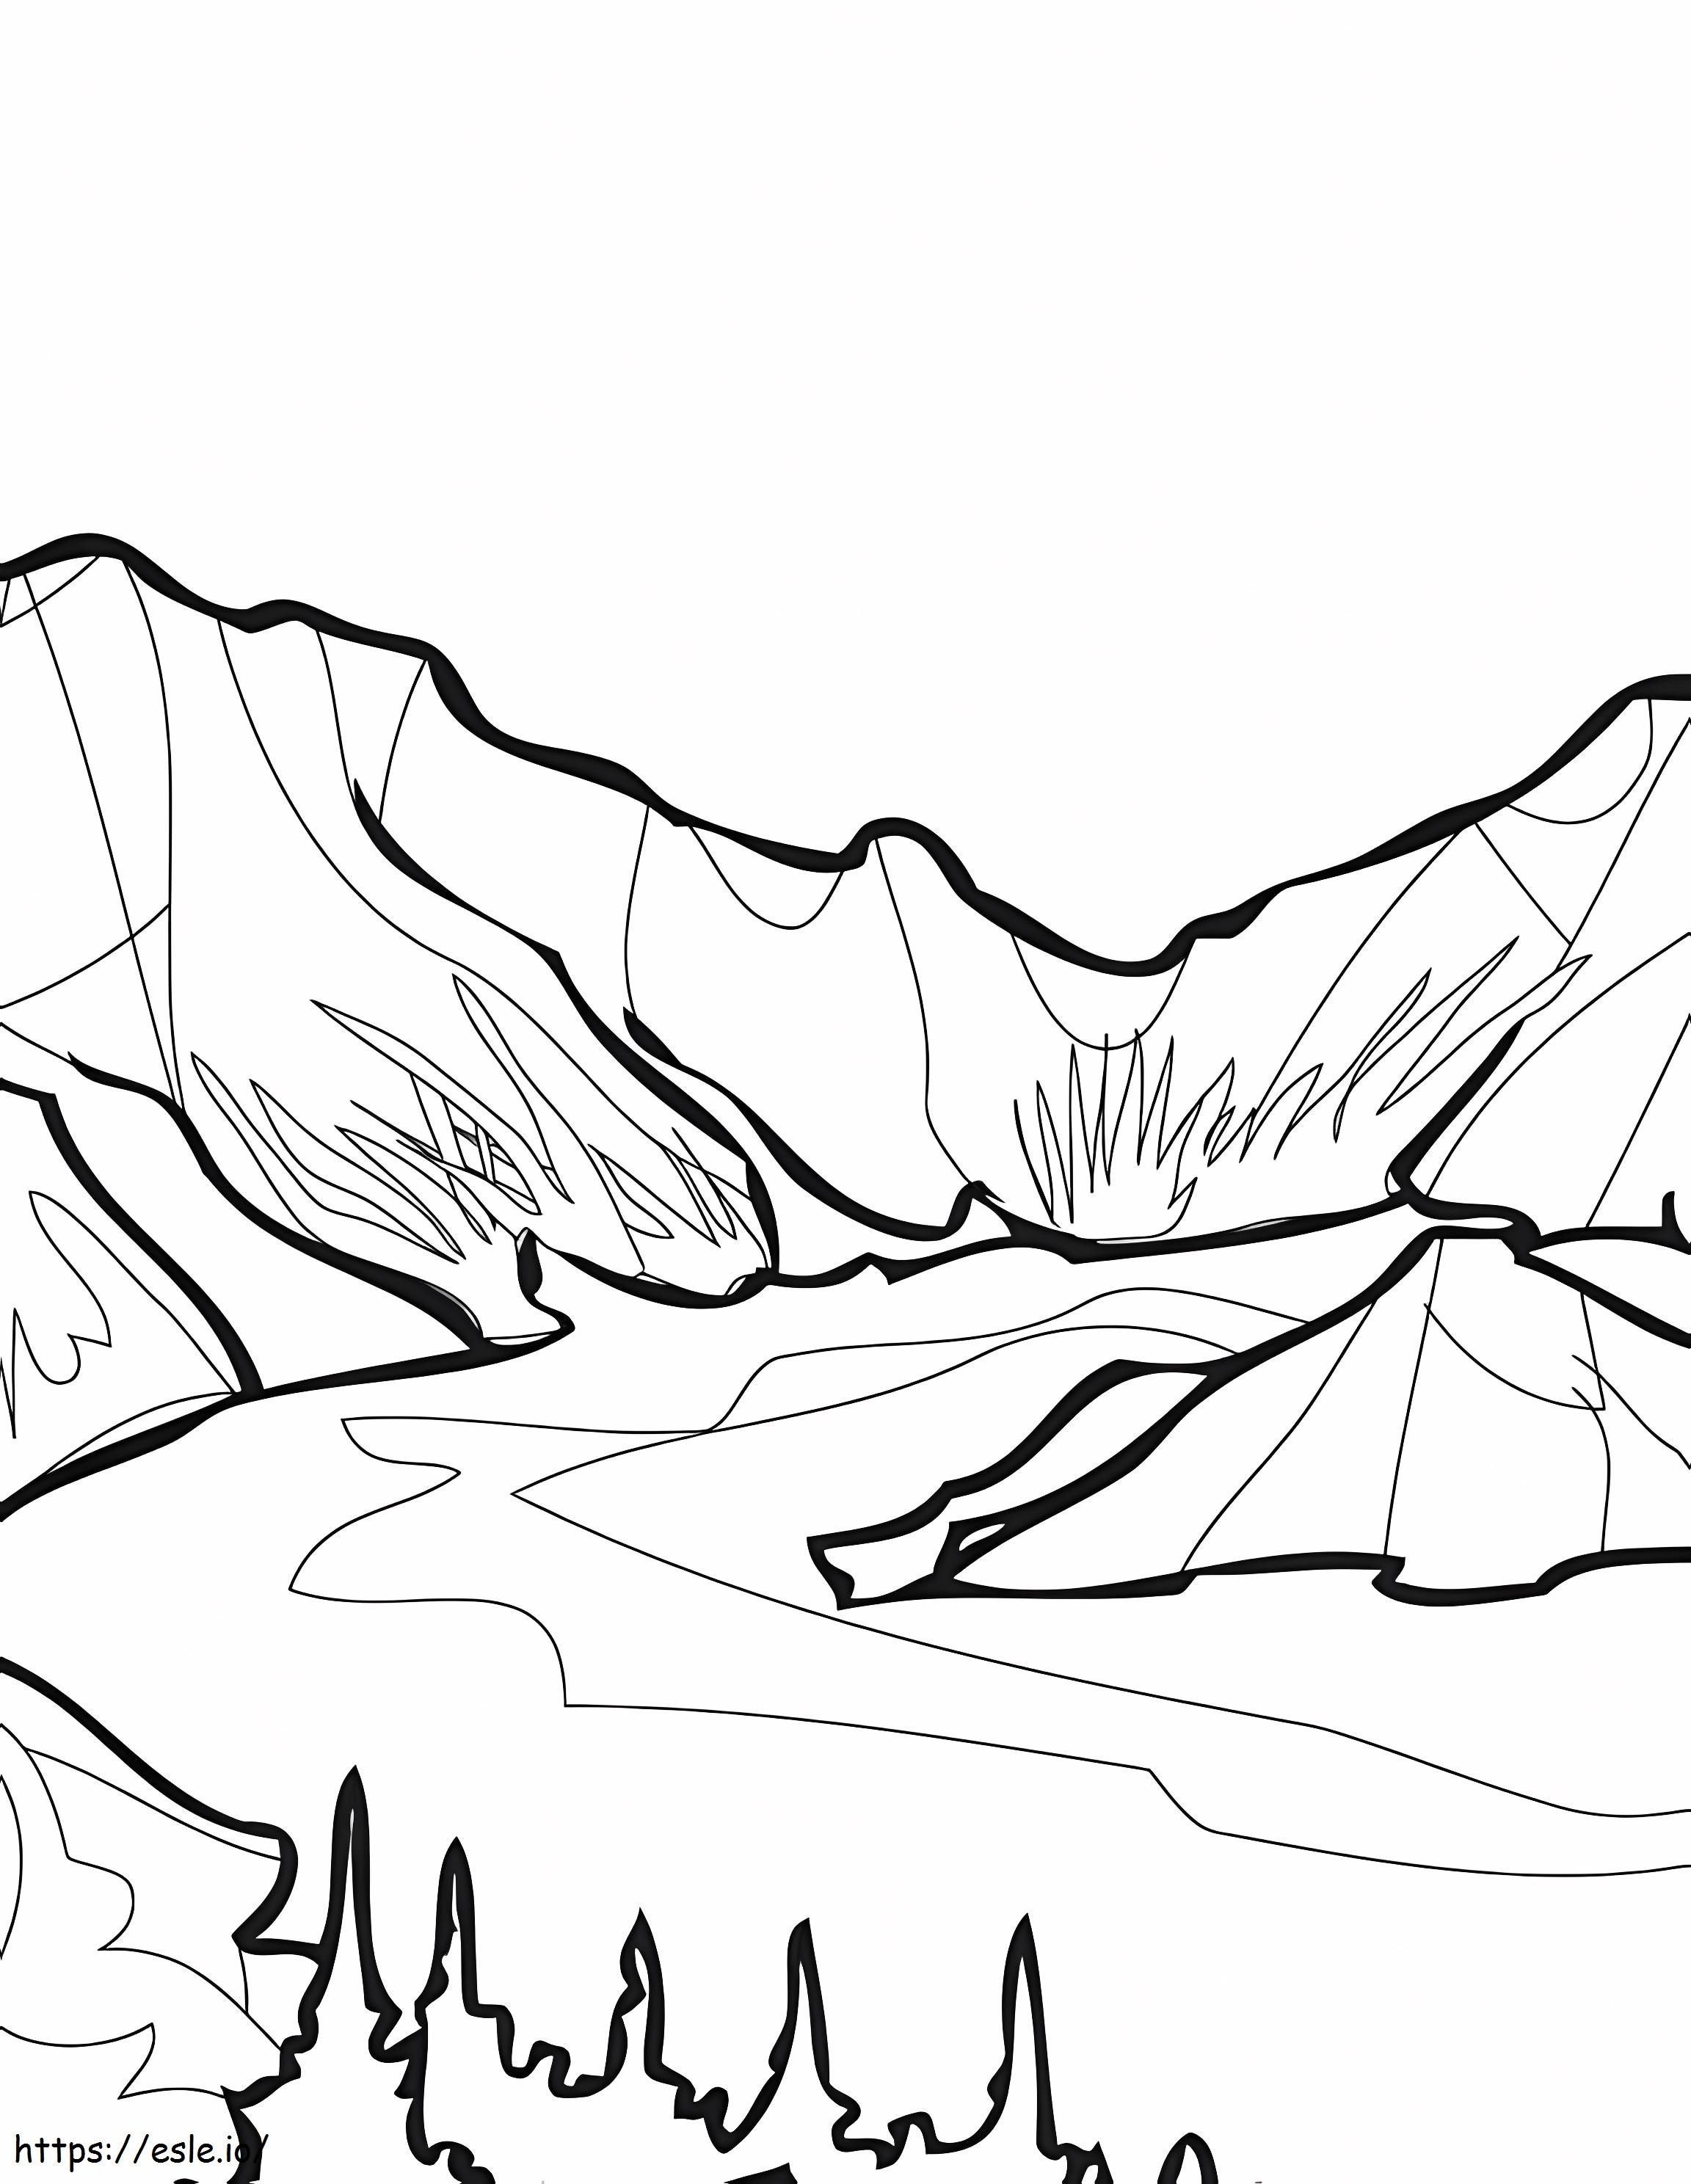 Crater Lake coloring page